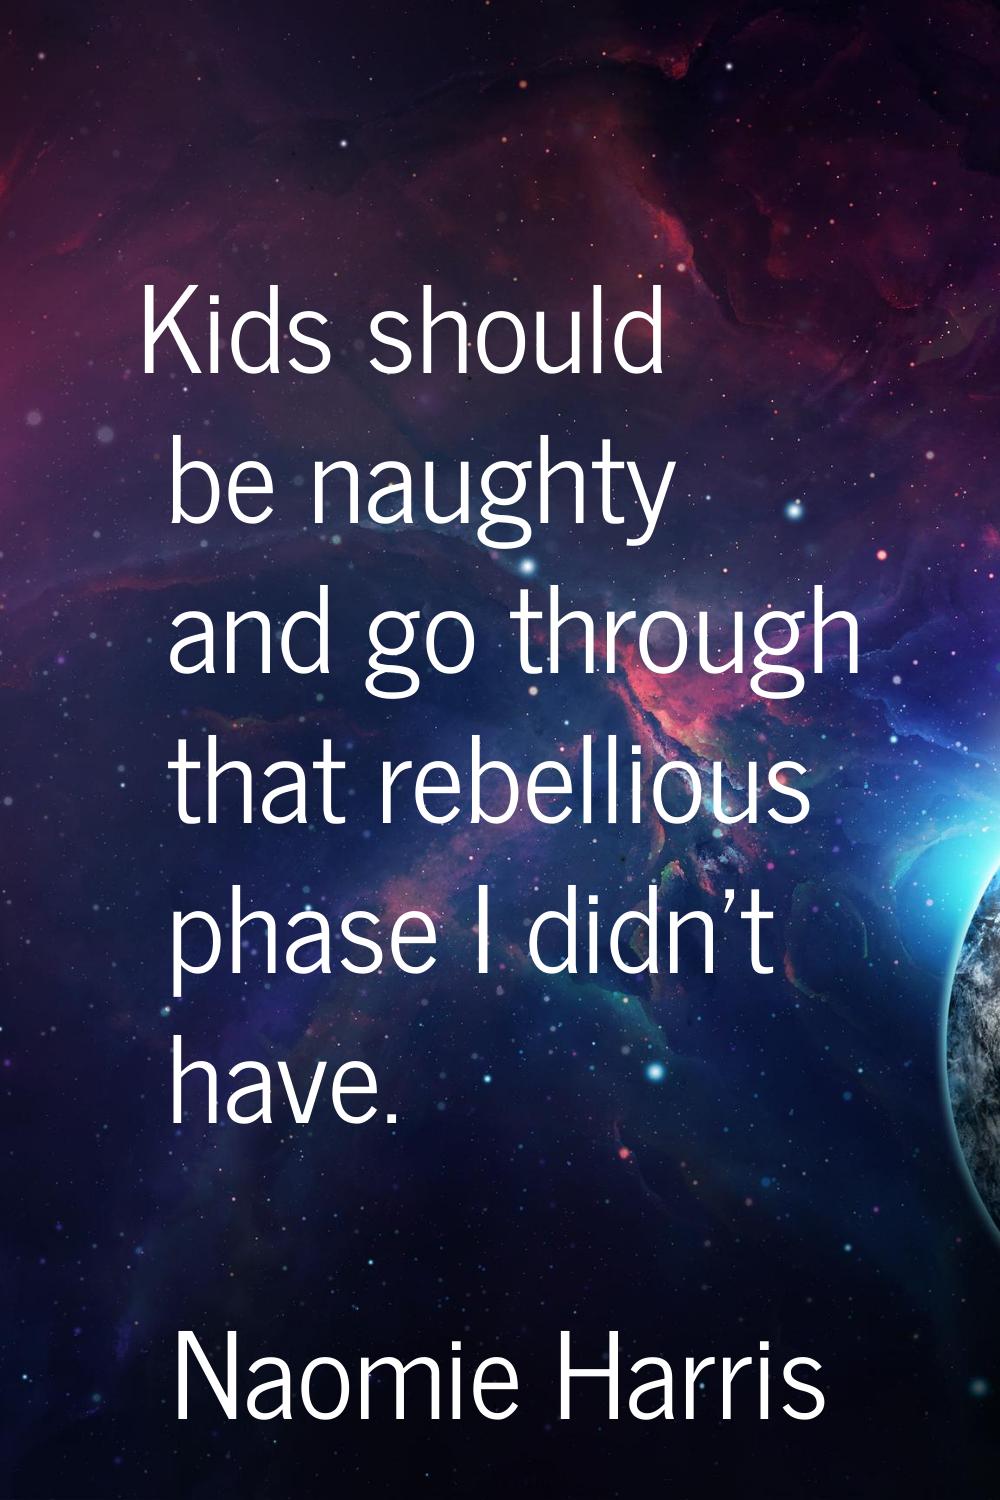 Kids should be naughty and go through that rebellious phase I didn't have.